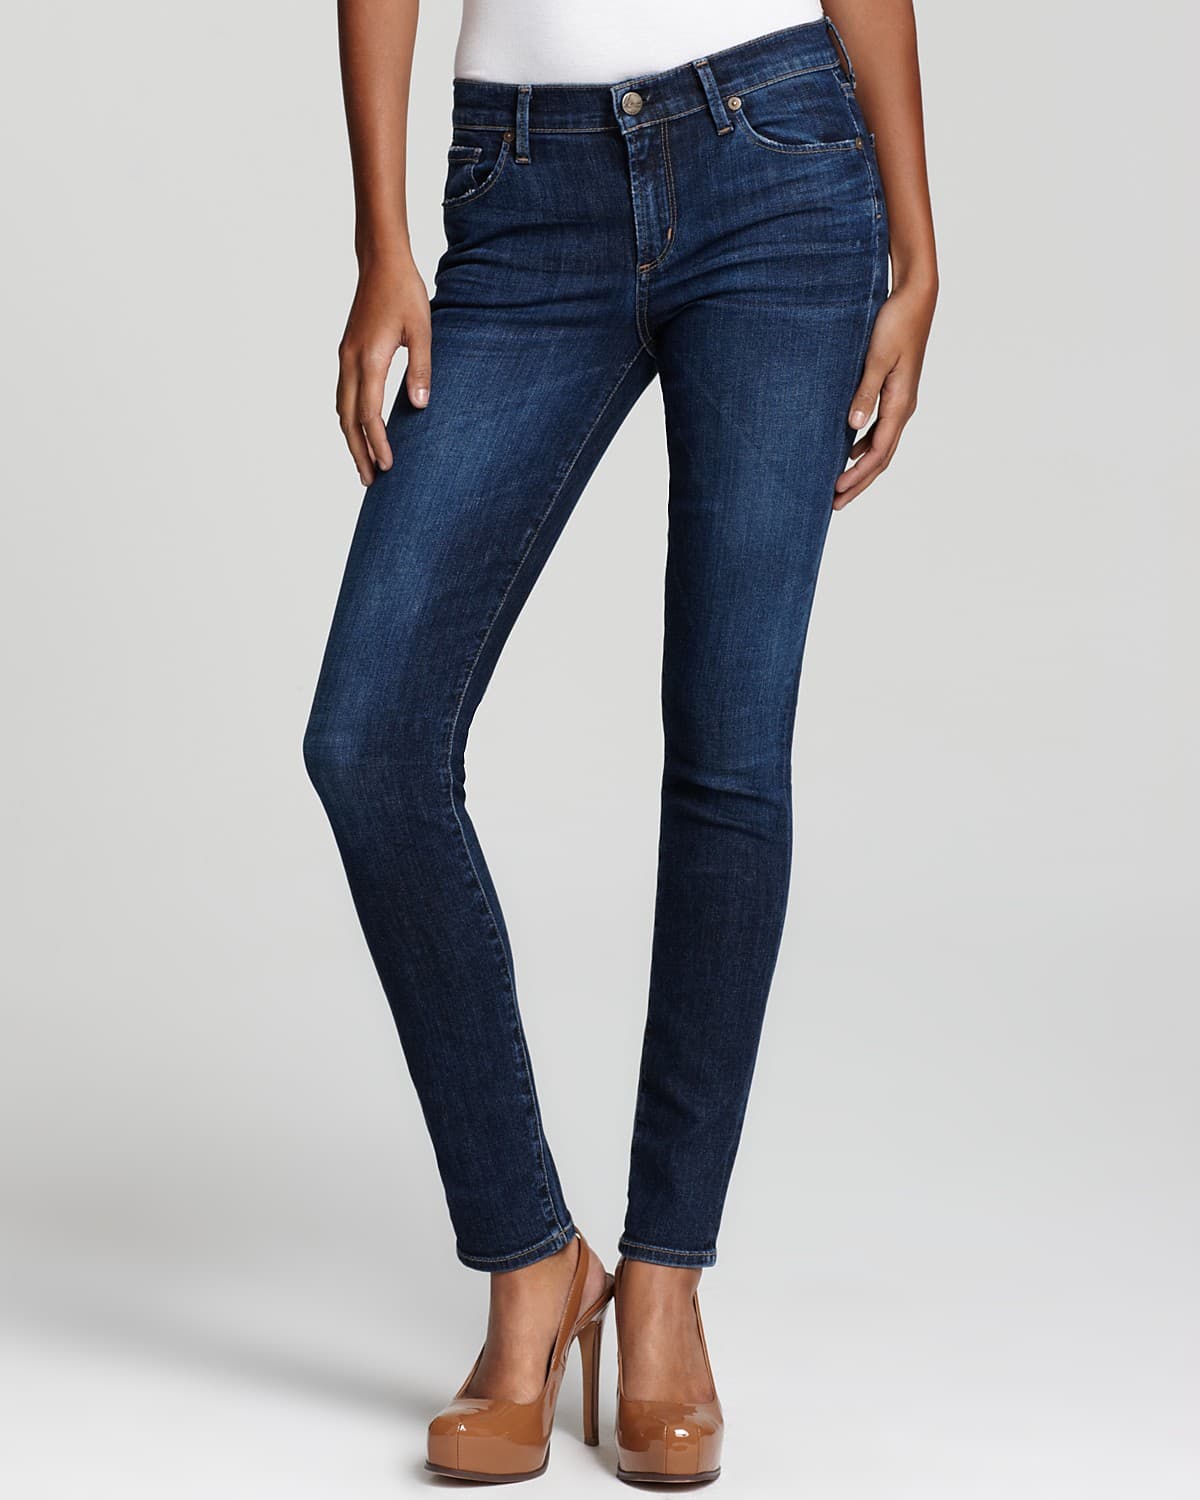 Random Best High-End Expensive Jeans For Women